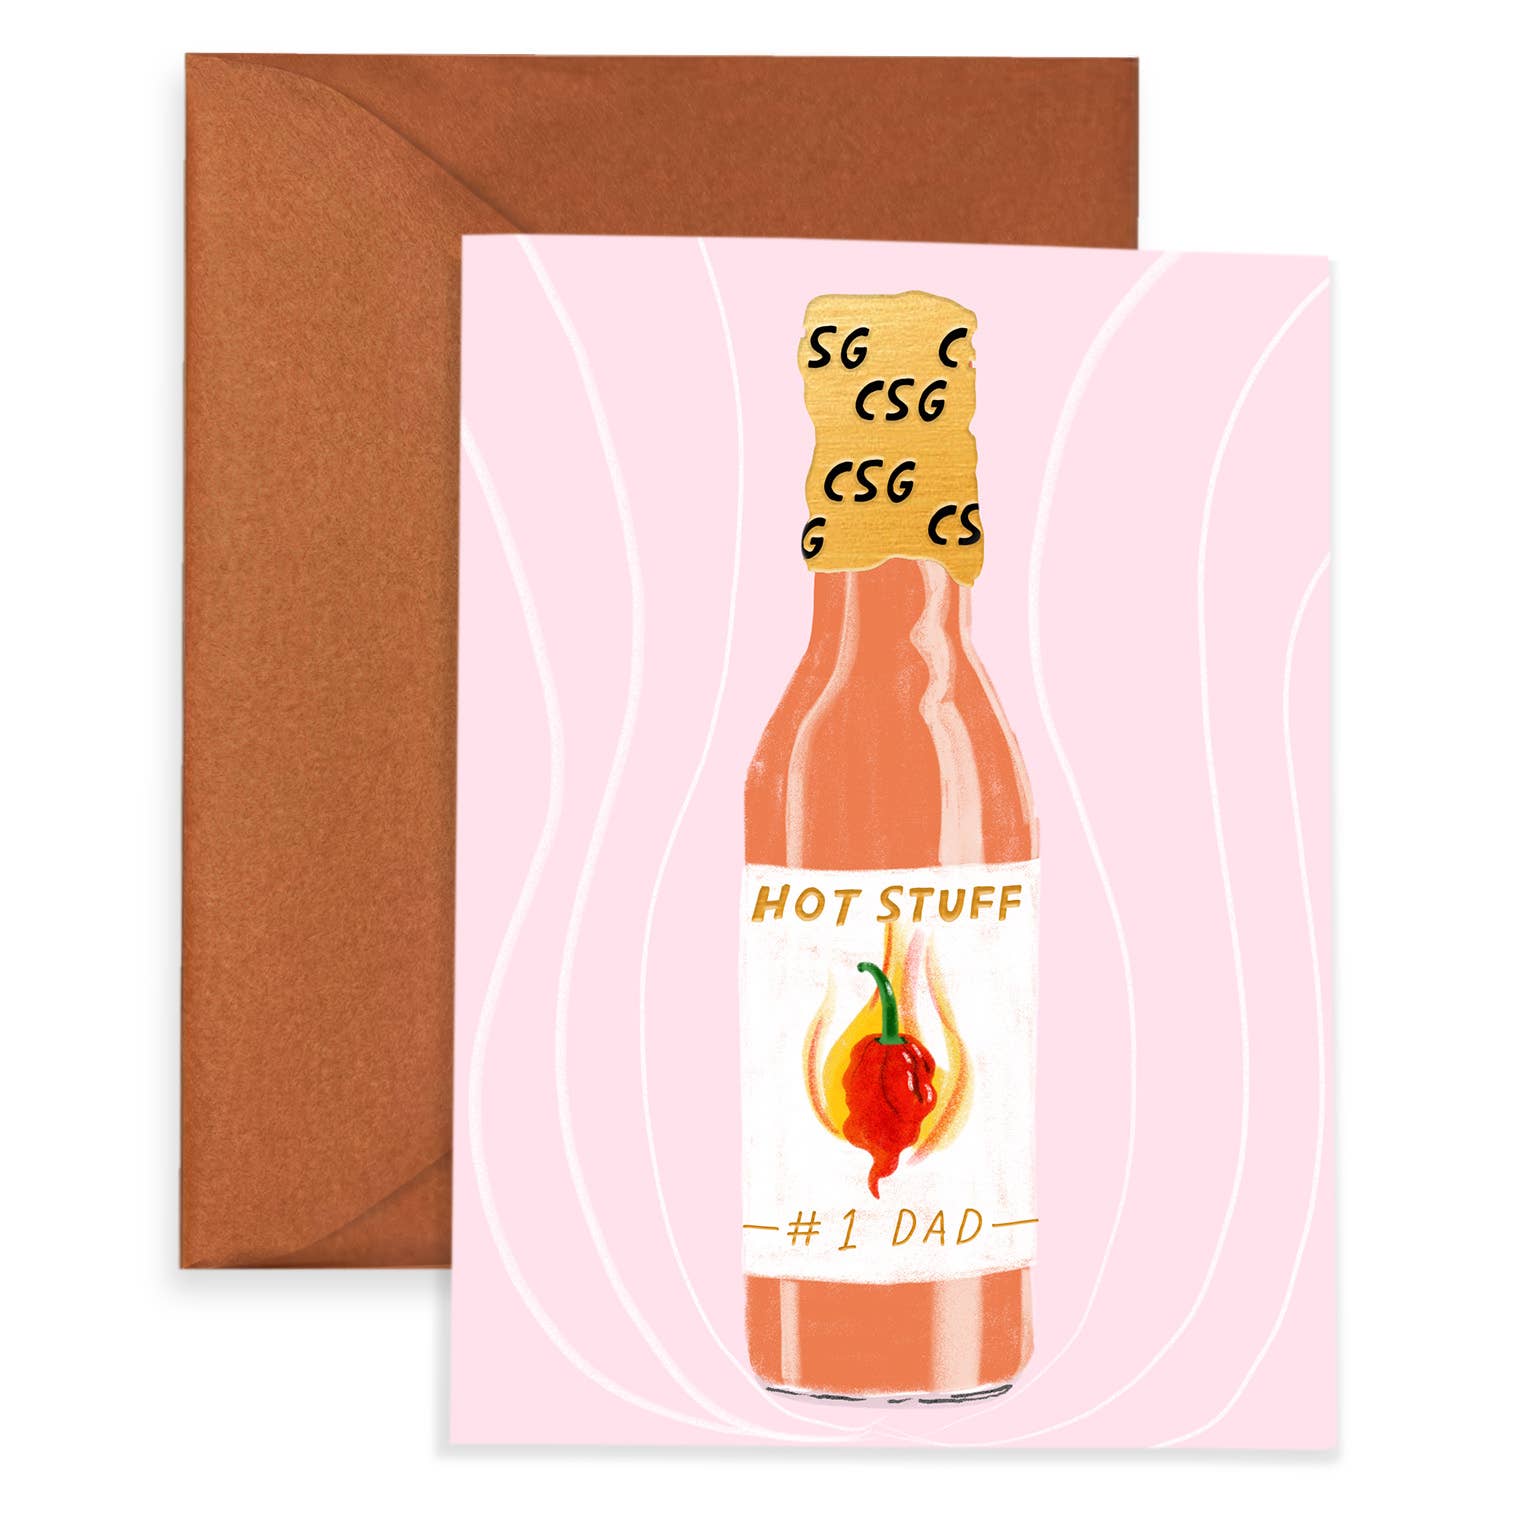 Father's day card with a hot sauce bottle on it. Label on bottle reads "hot stuff" above image of chili pepper and below that it reads "#1 dad"